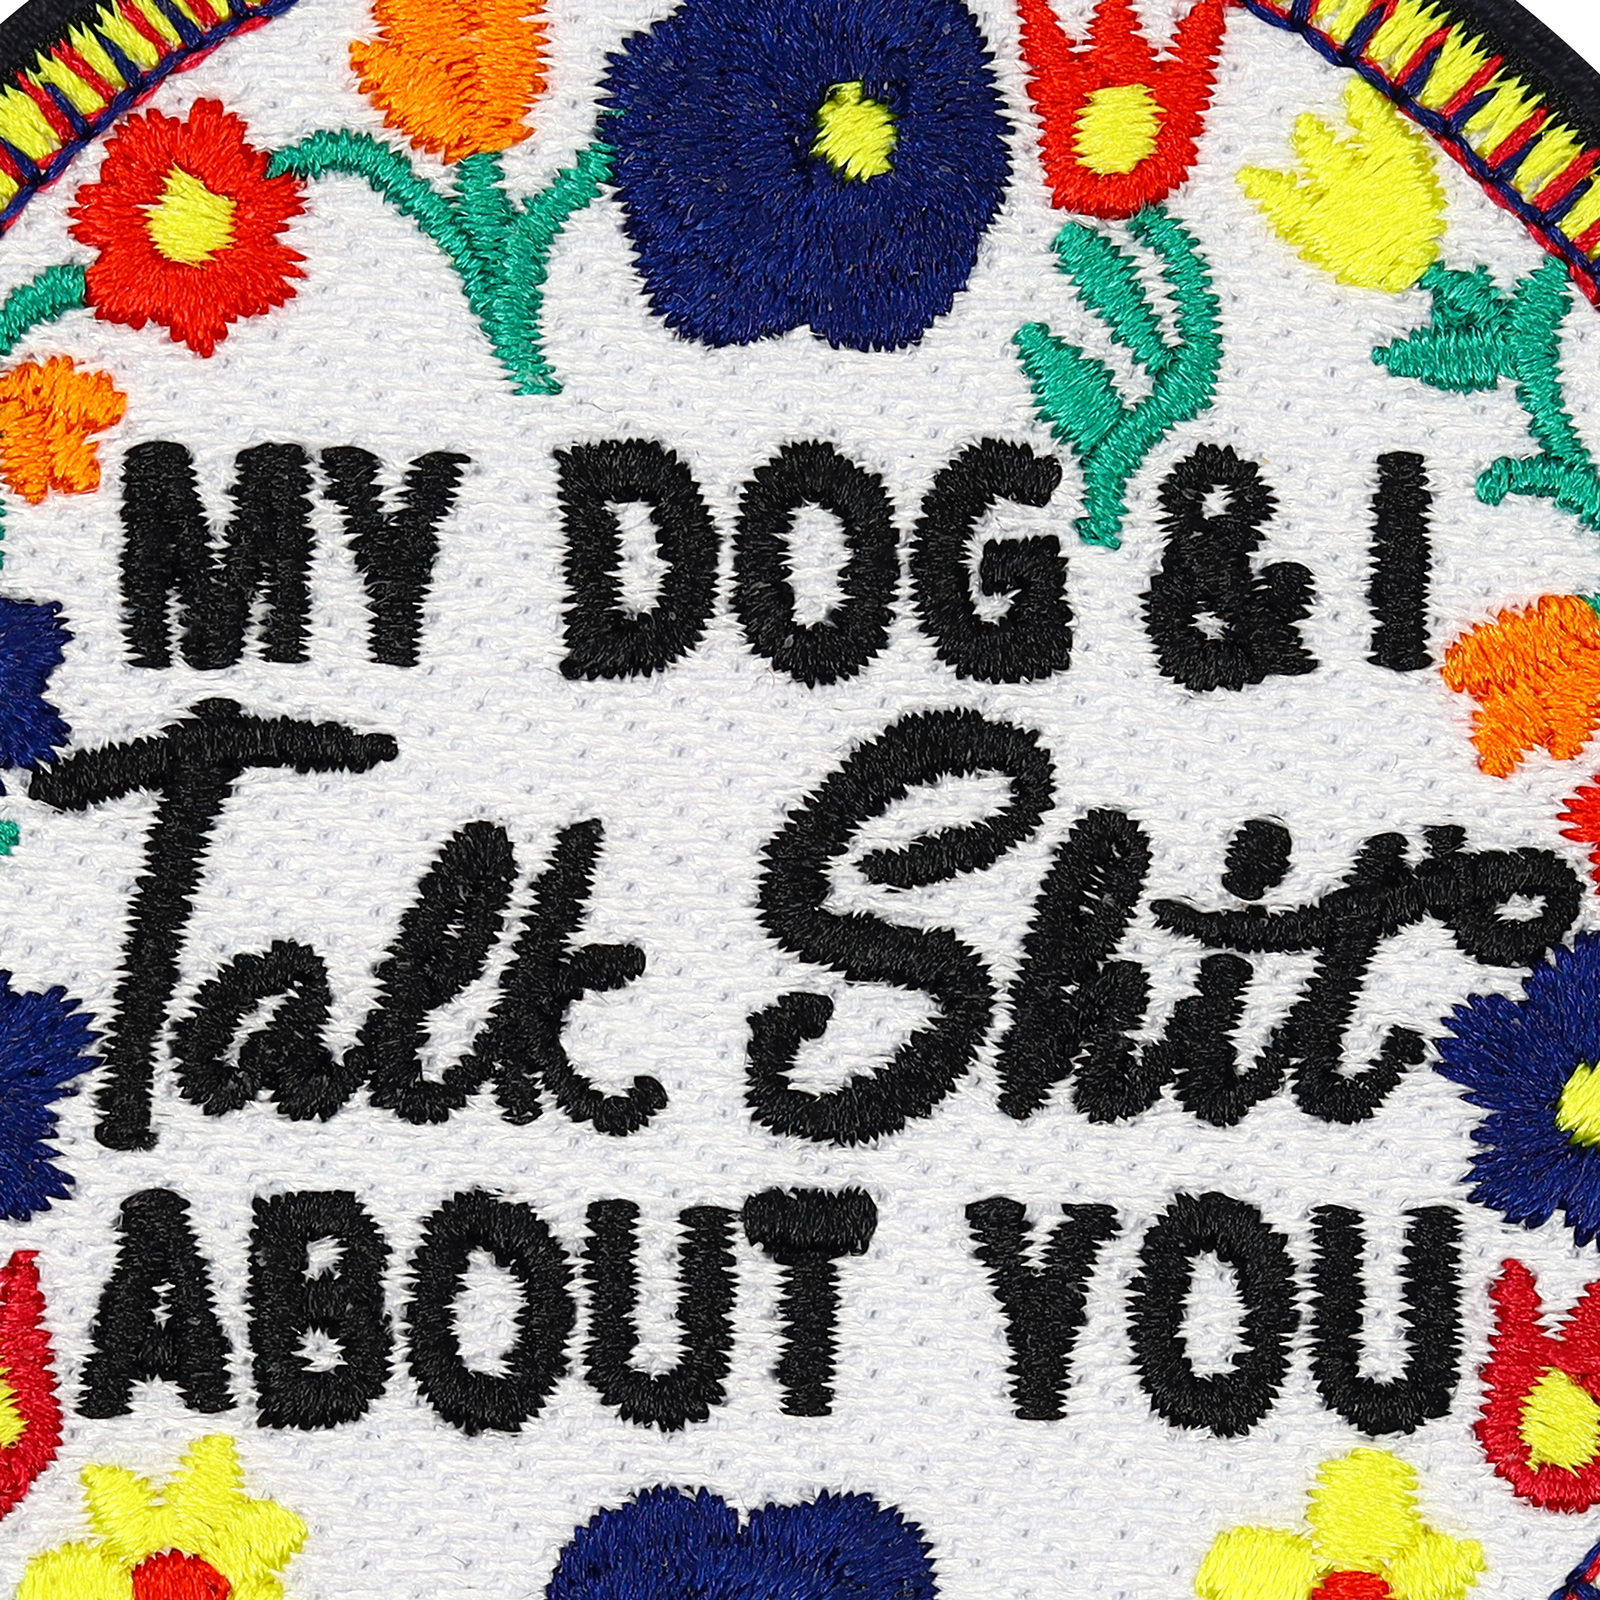 My dog & I talk shit about you - Patch